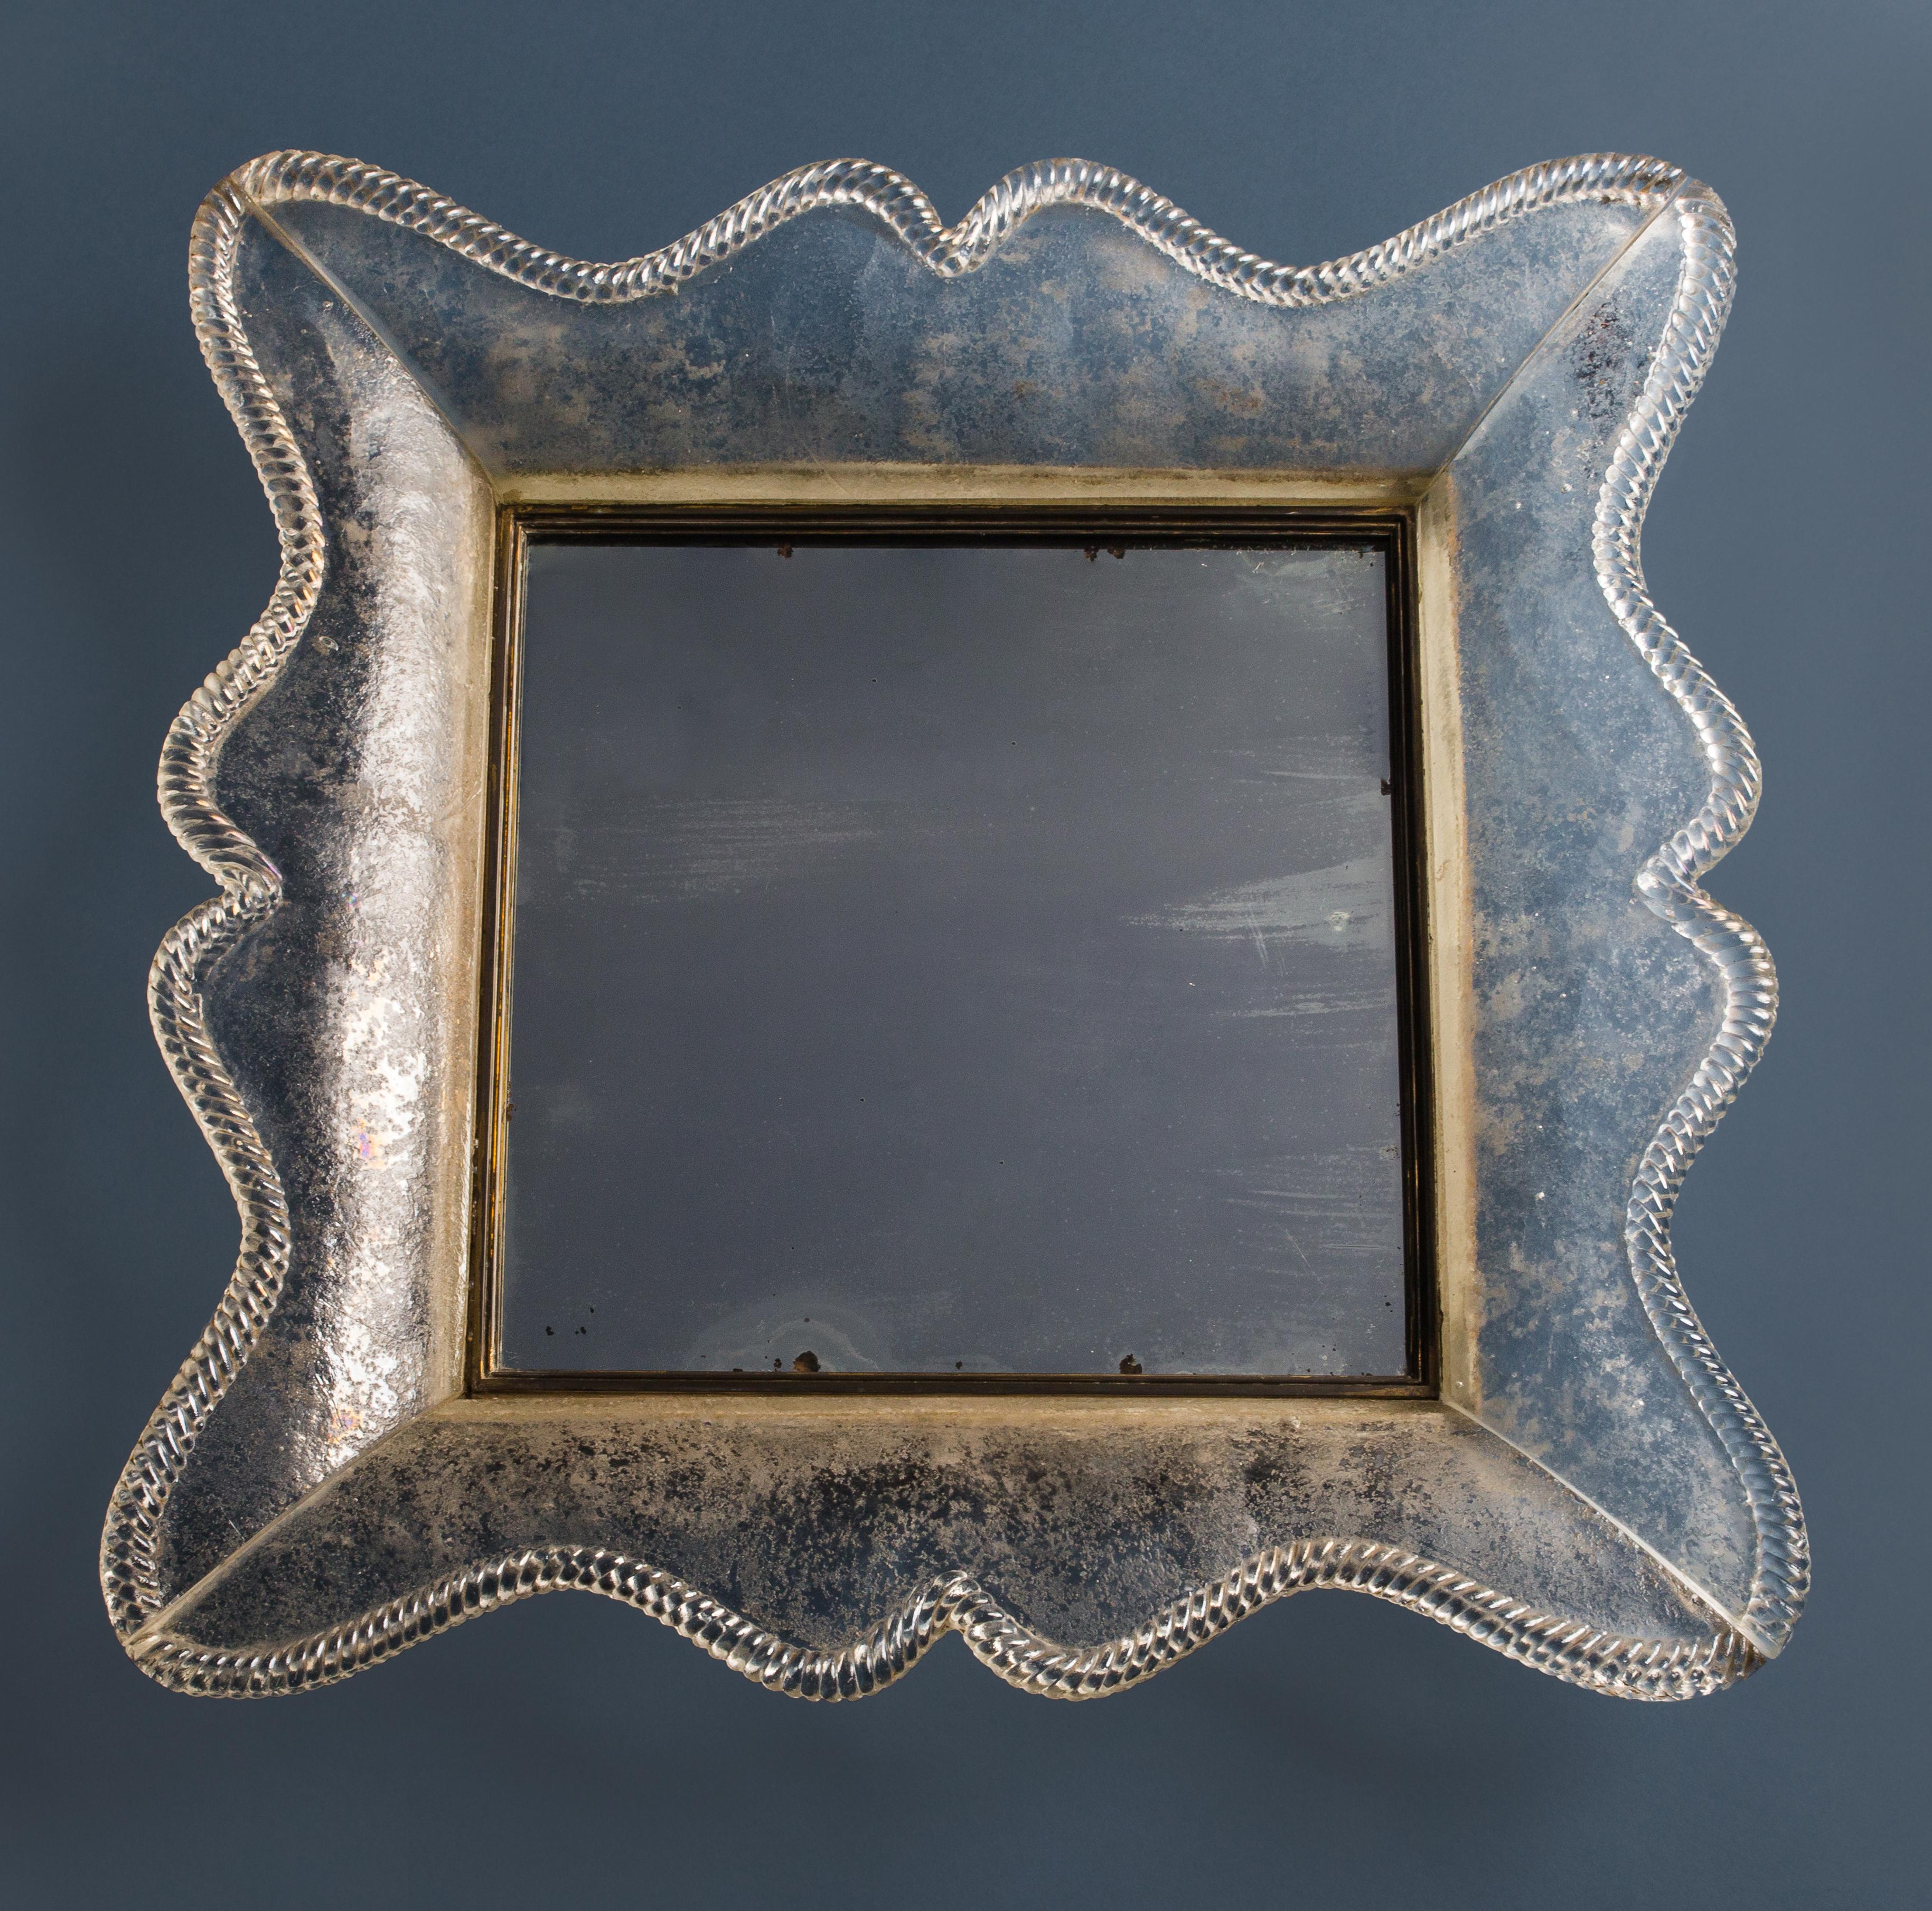 Seguso Vetri d'Arte thick smoked glass frame (appears to be tinted blue, but actually smoked clear glass with dark grey streaks) with twisted rope border, original mirrored glass mounted with brass, Italy, circa 1940. This classic and elegant mirror